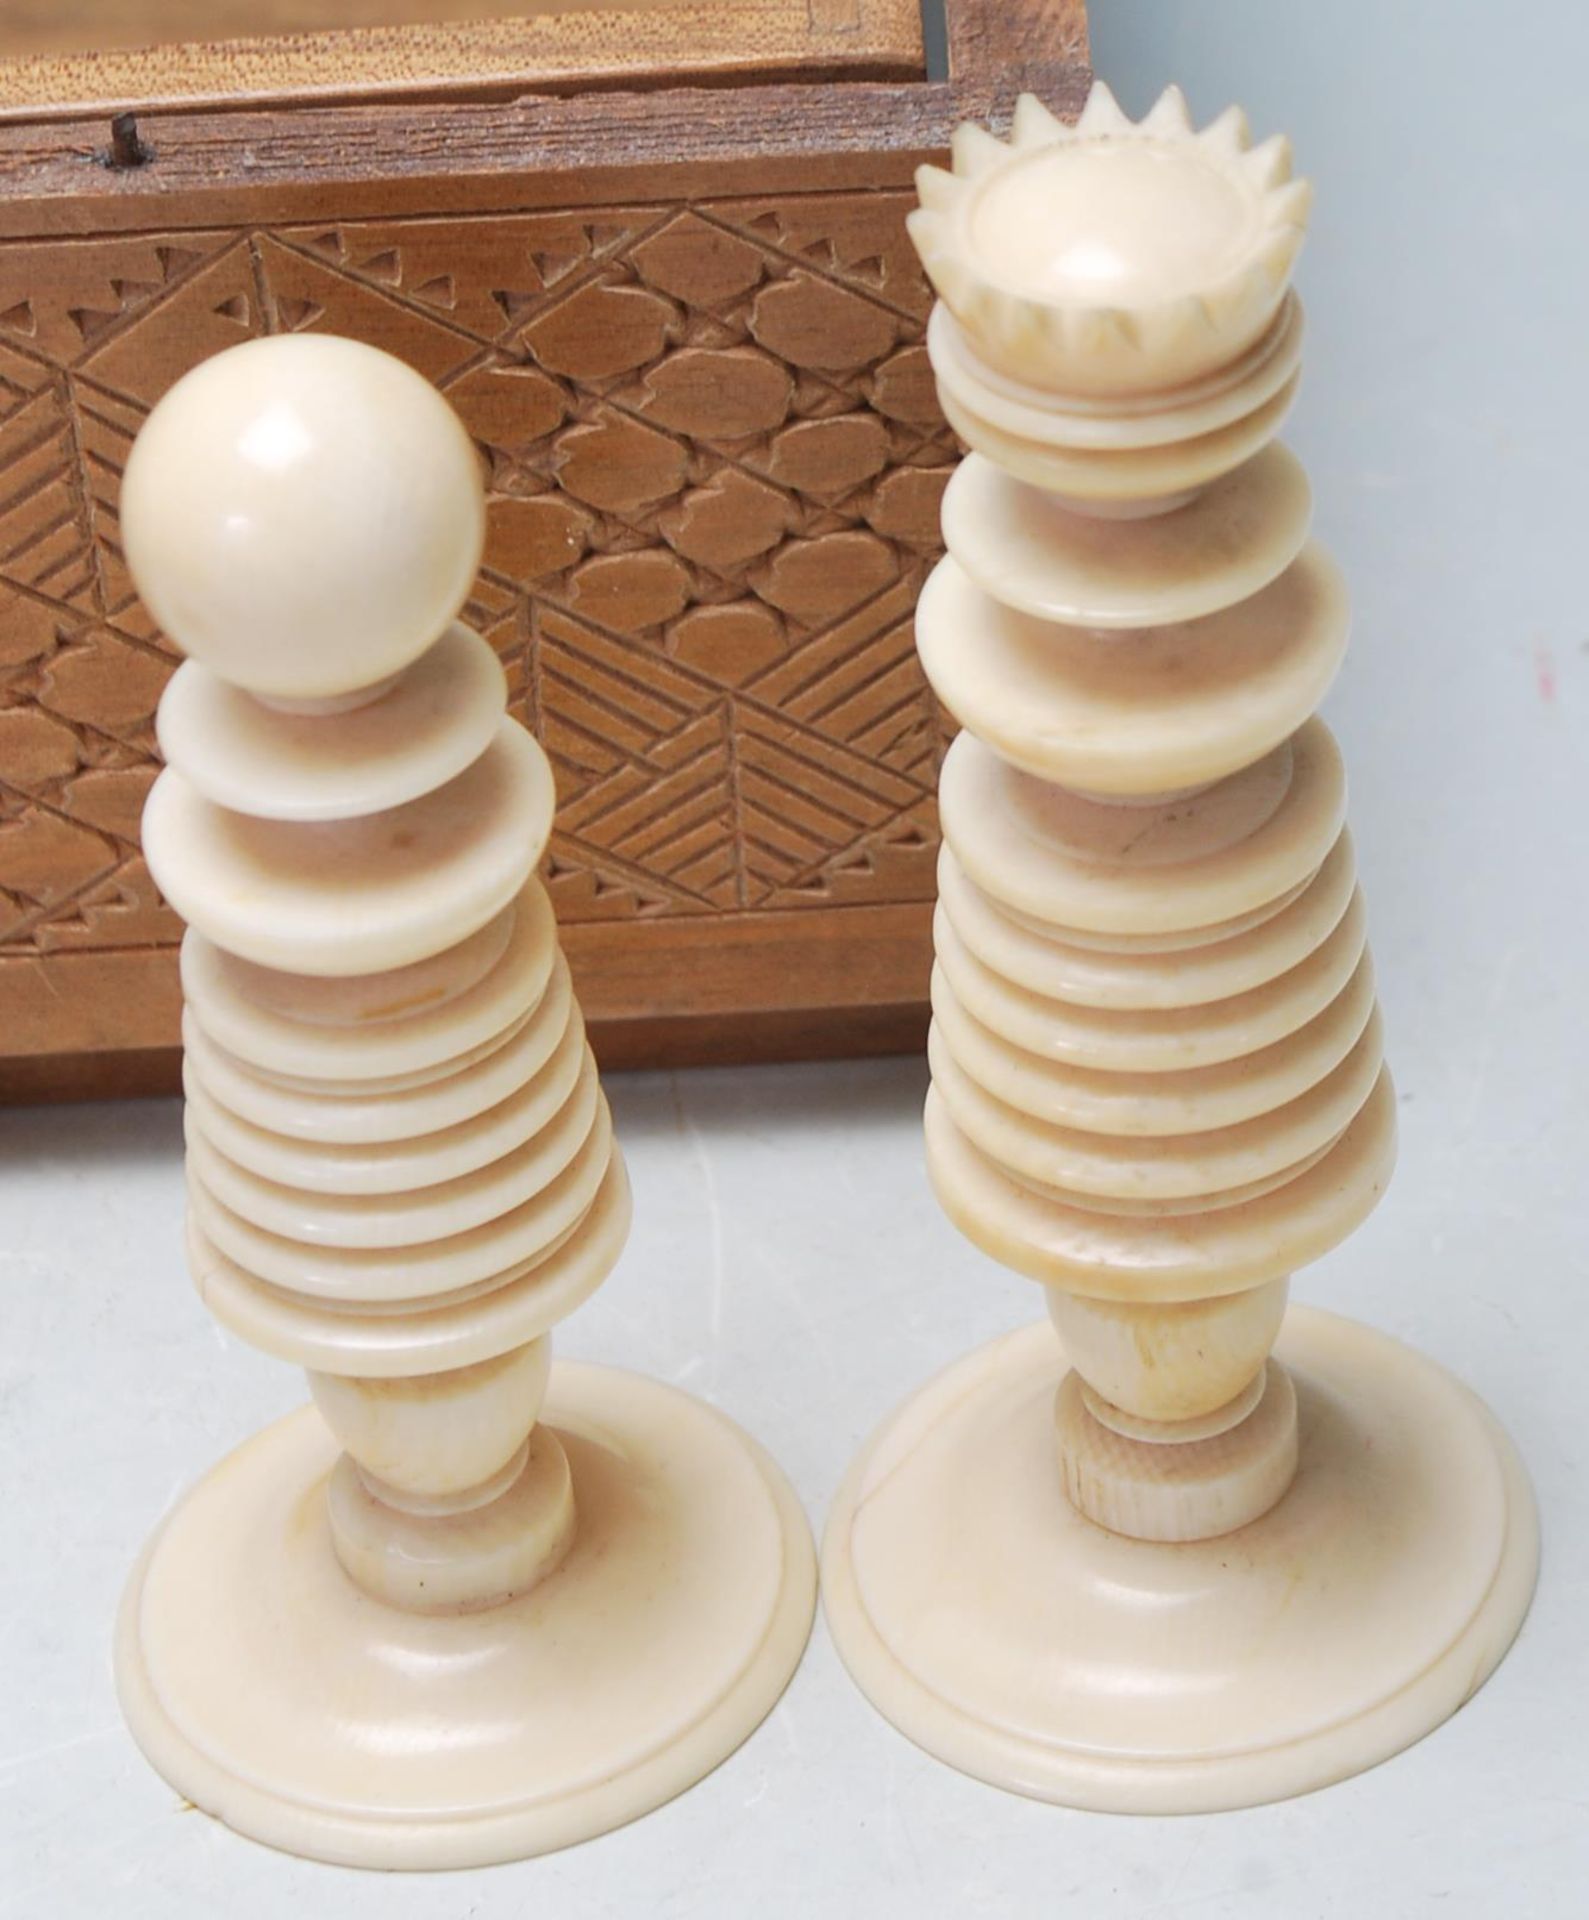 GROUP OF 19TH CENTURY VICTORIAN SATIN IVORY CHESS PIECES - Image 7 of 9